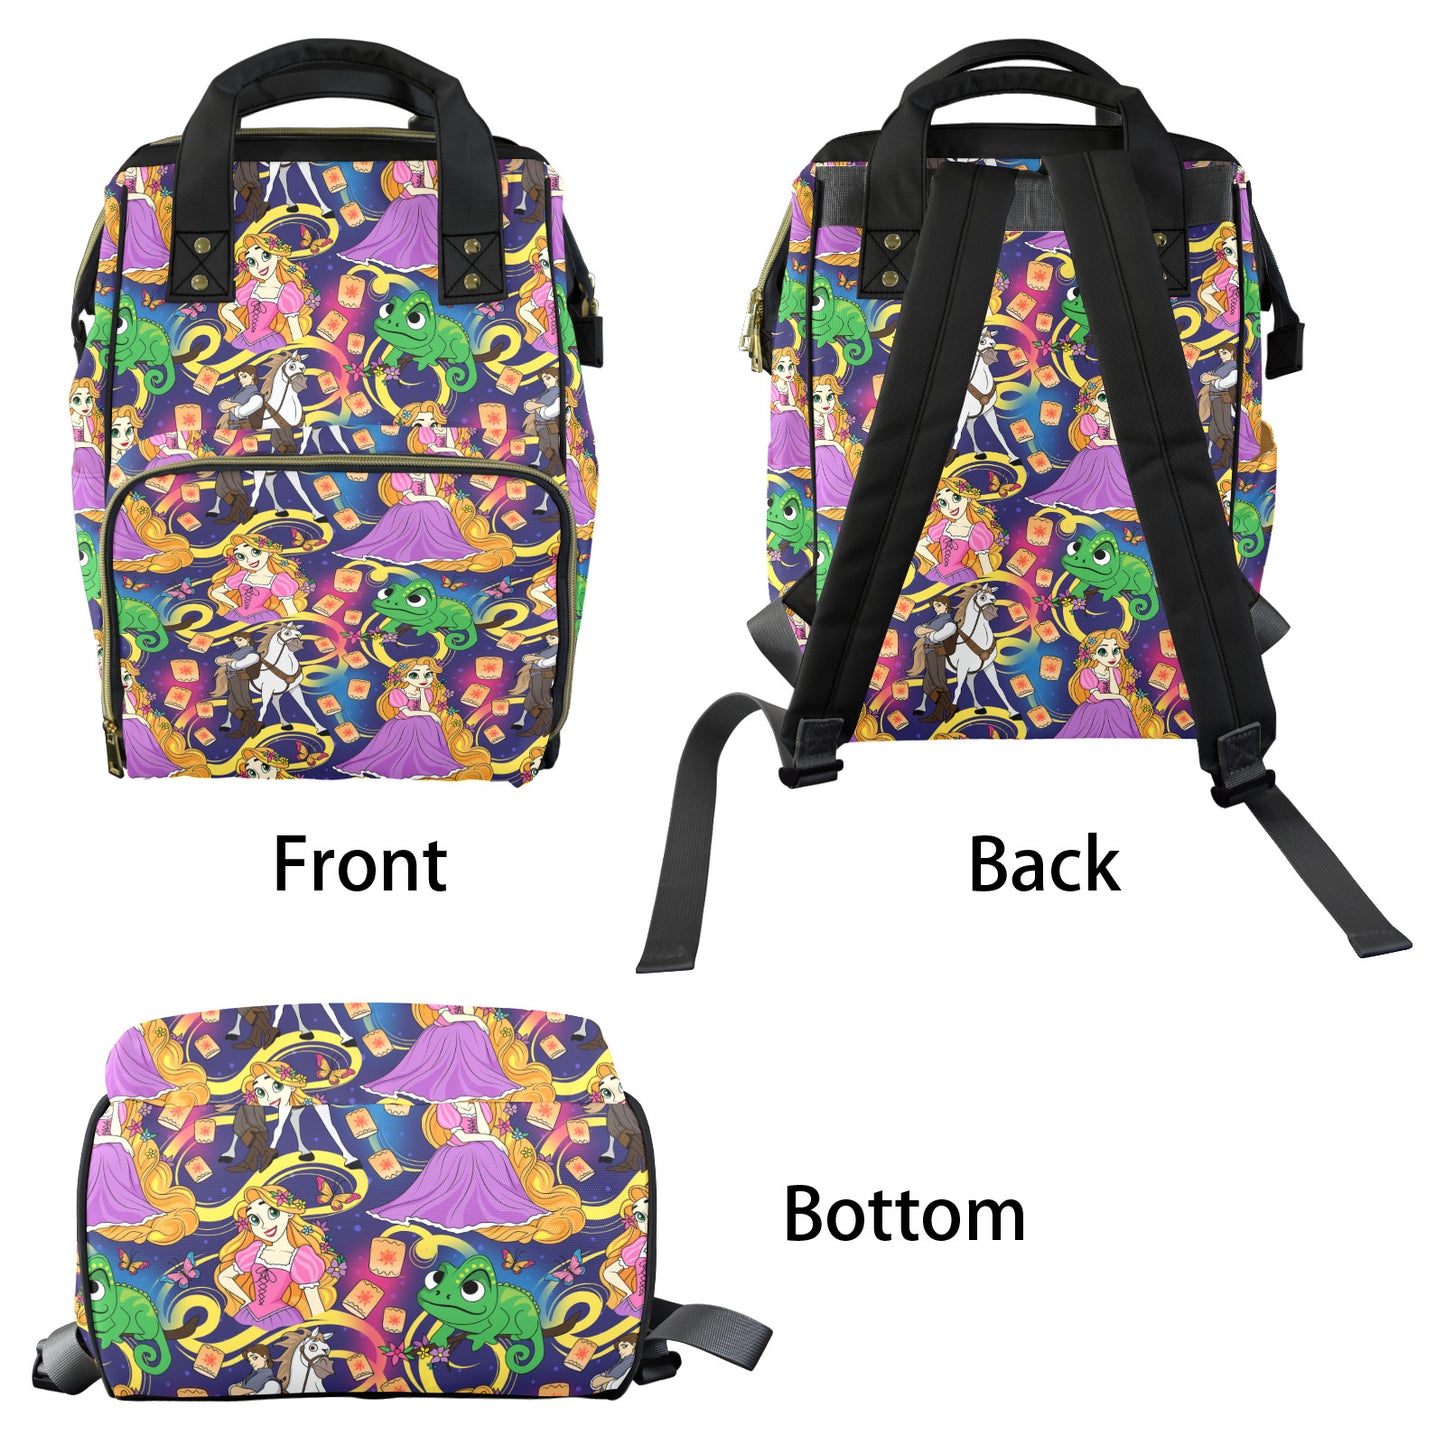 At Last I See The Light Multi-Function Diaper Bag